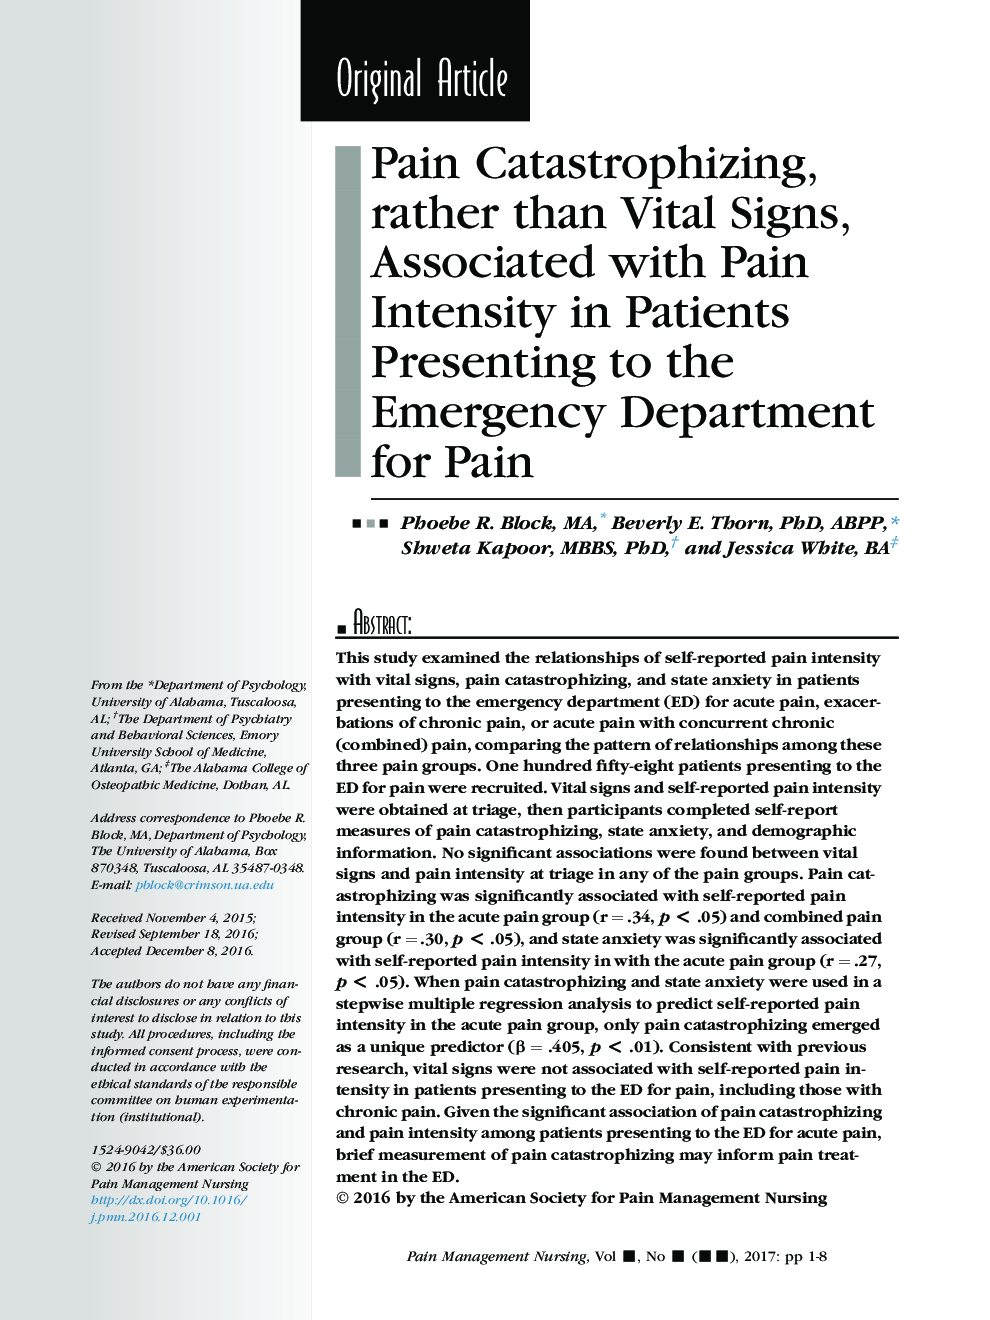 Pain Catastrophizing, rather than Vital Signs, Associated with Pain Intensity in Patients Presenting to the Emergency Department for Pain